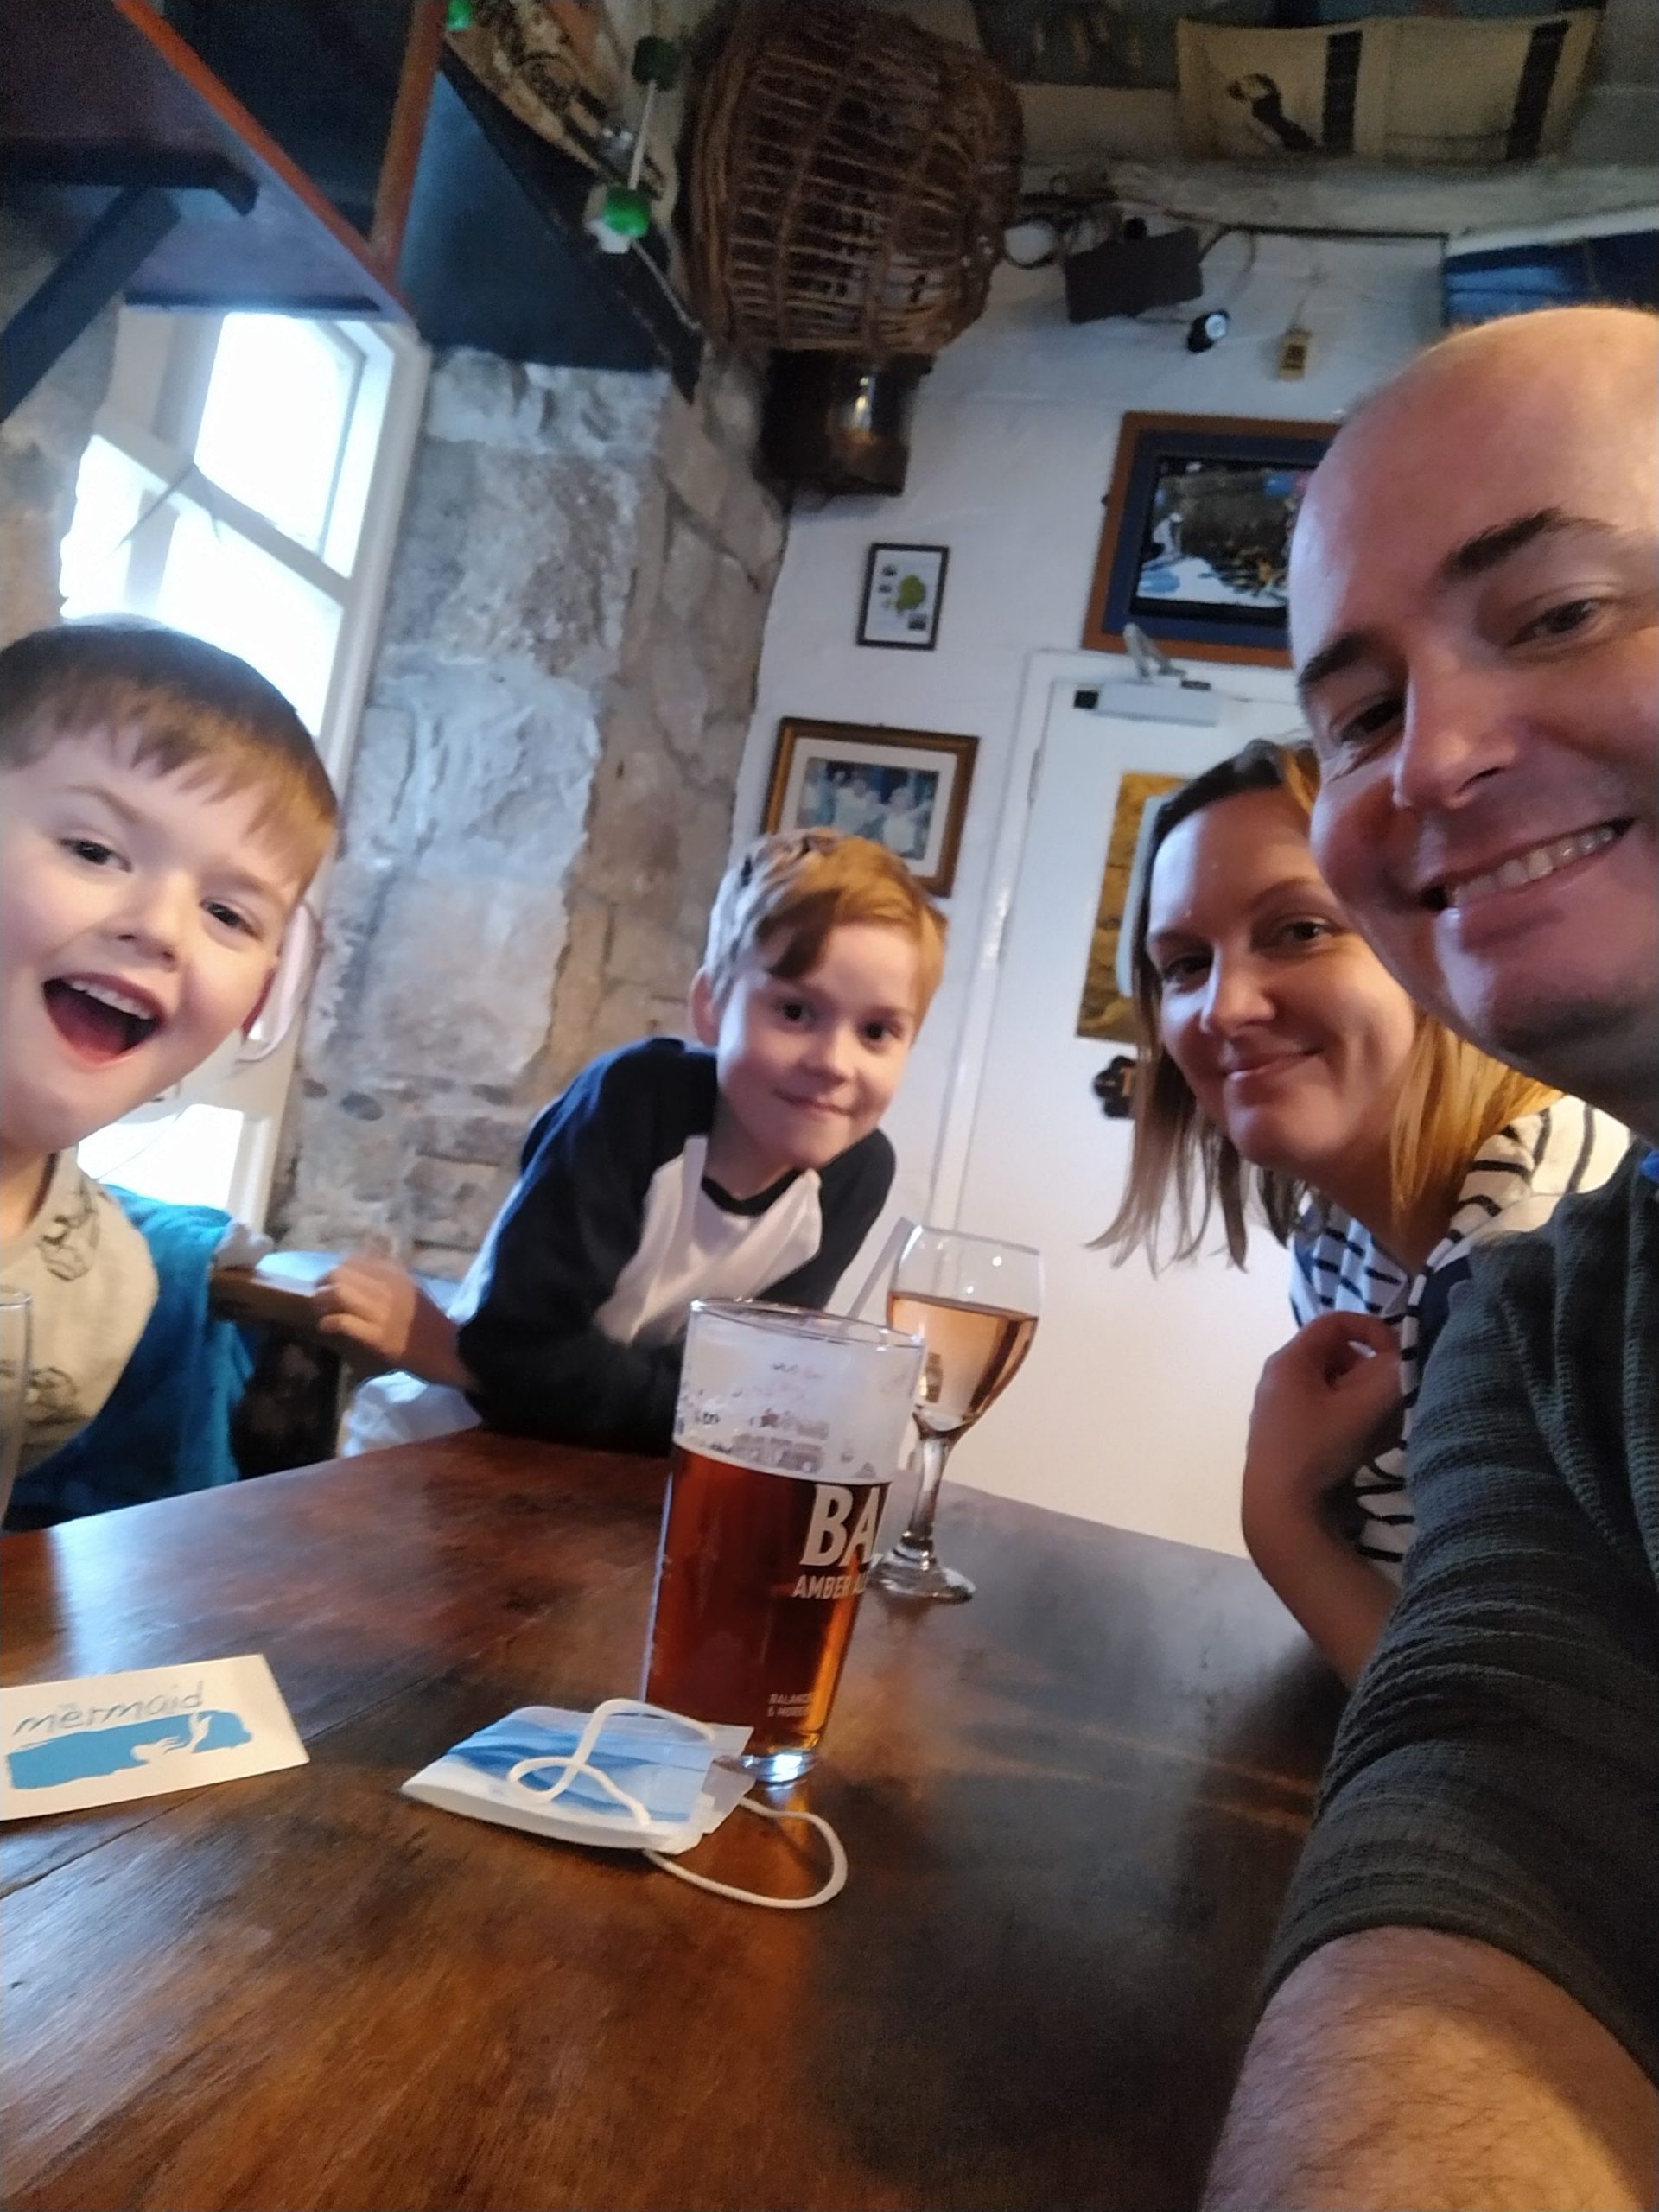 Two adults and two children at pub table indoors